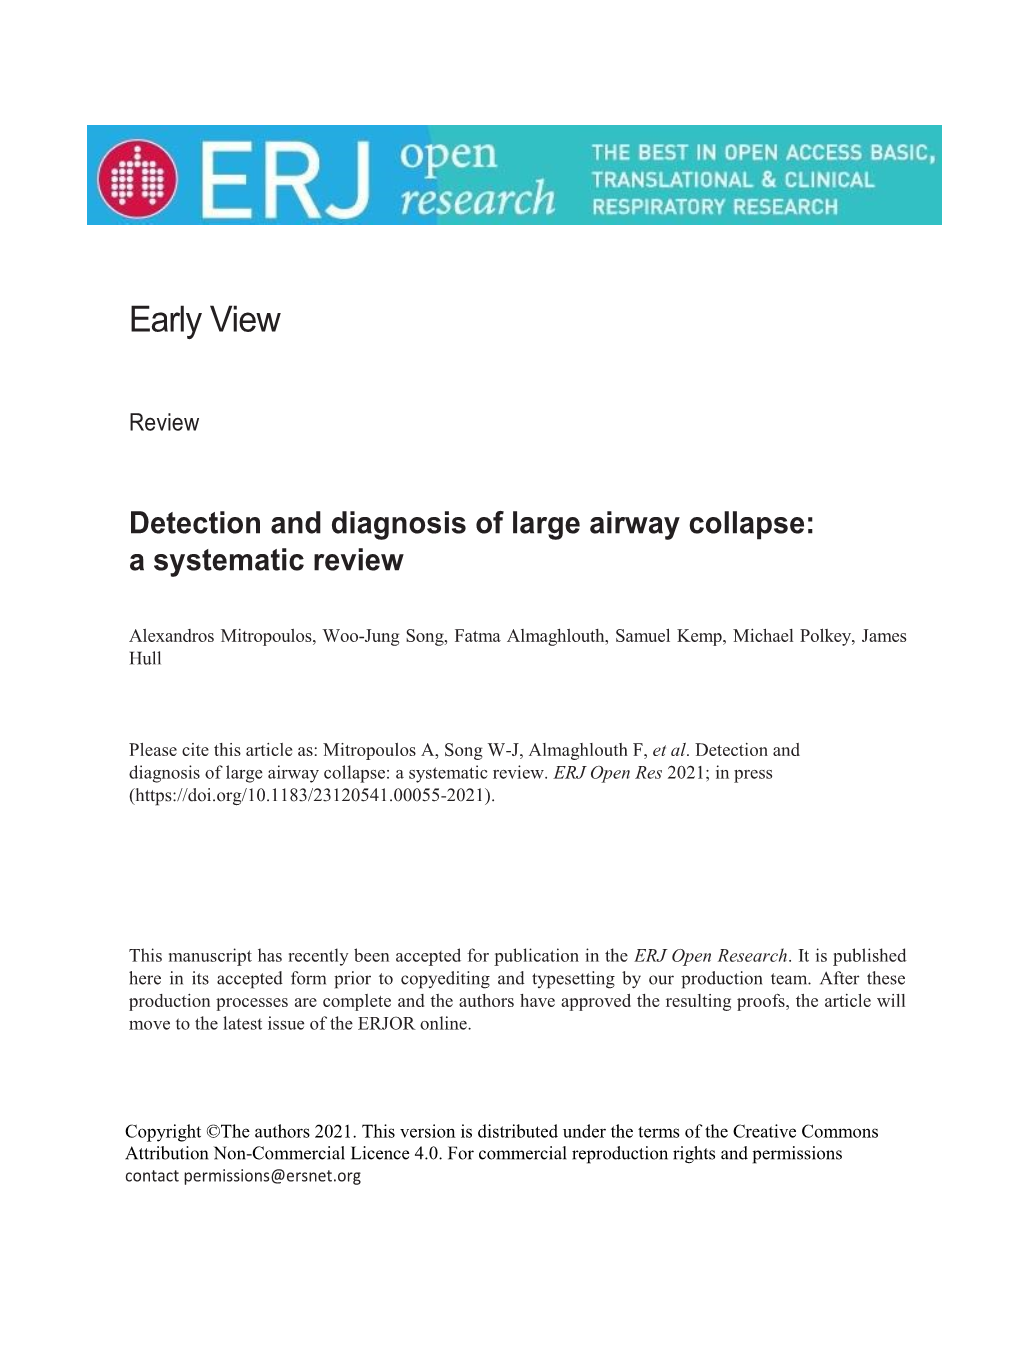 Detection and Diagnosis of Large Airway Collapse: a Systematic Review